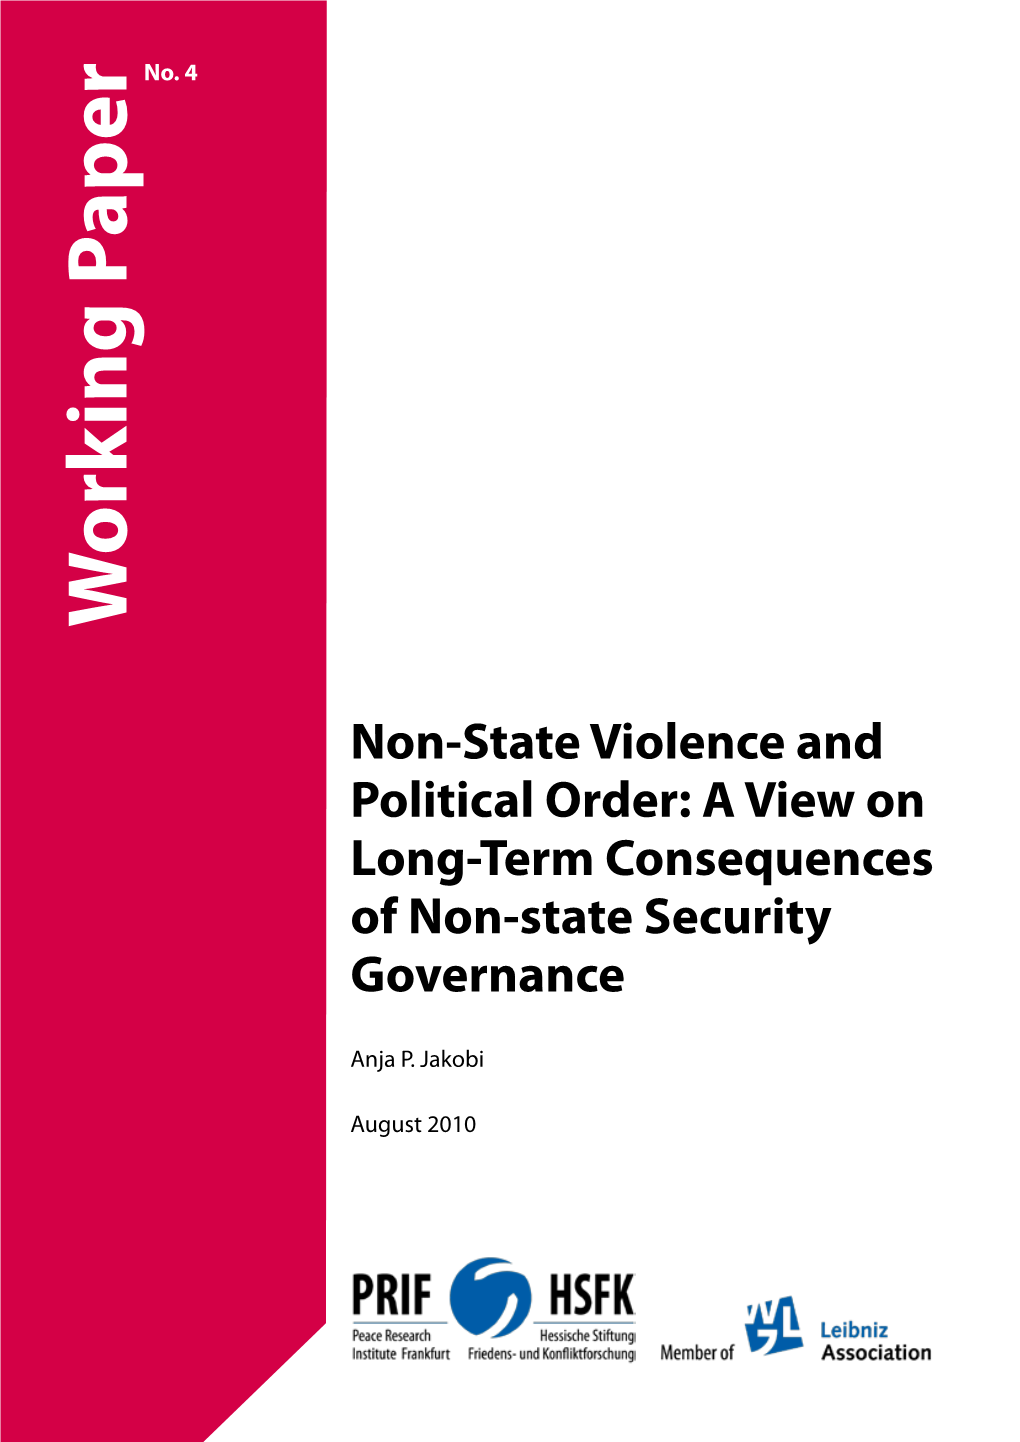 Non-State Violence and Political Order: a View on Long-Term Consequences of Non-State Security Governance